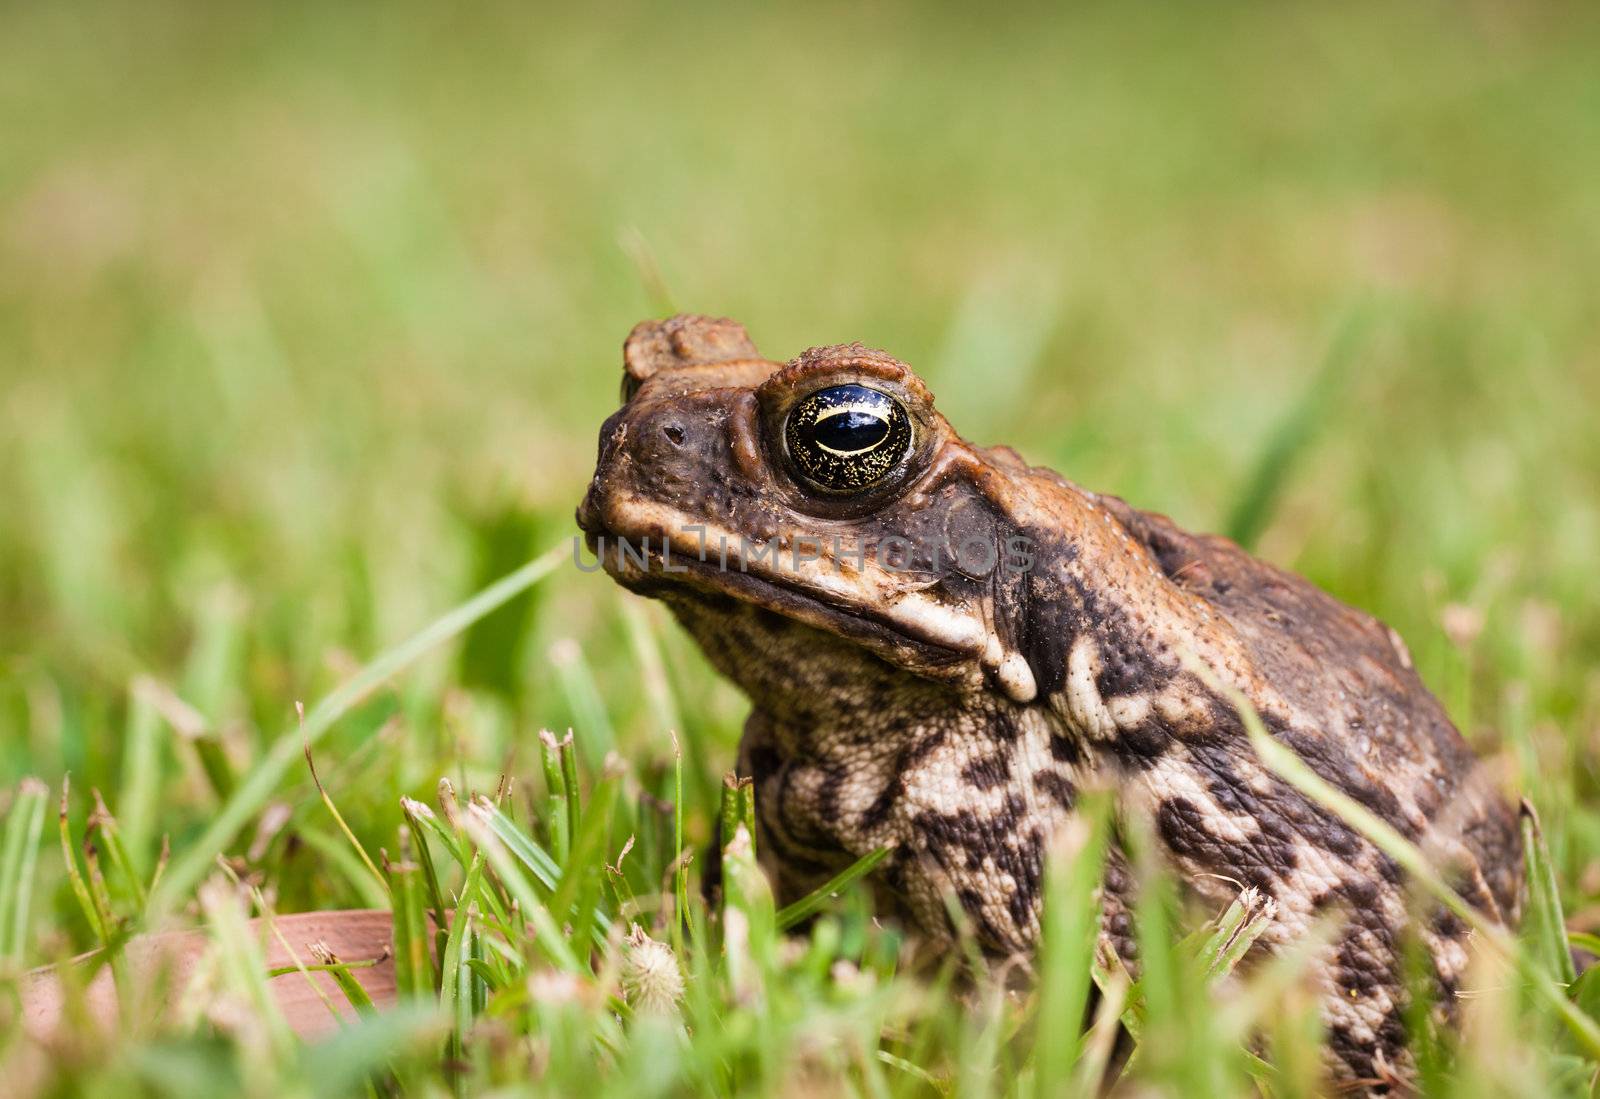 Close-up of a Cane toad in grass by Jaykayl